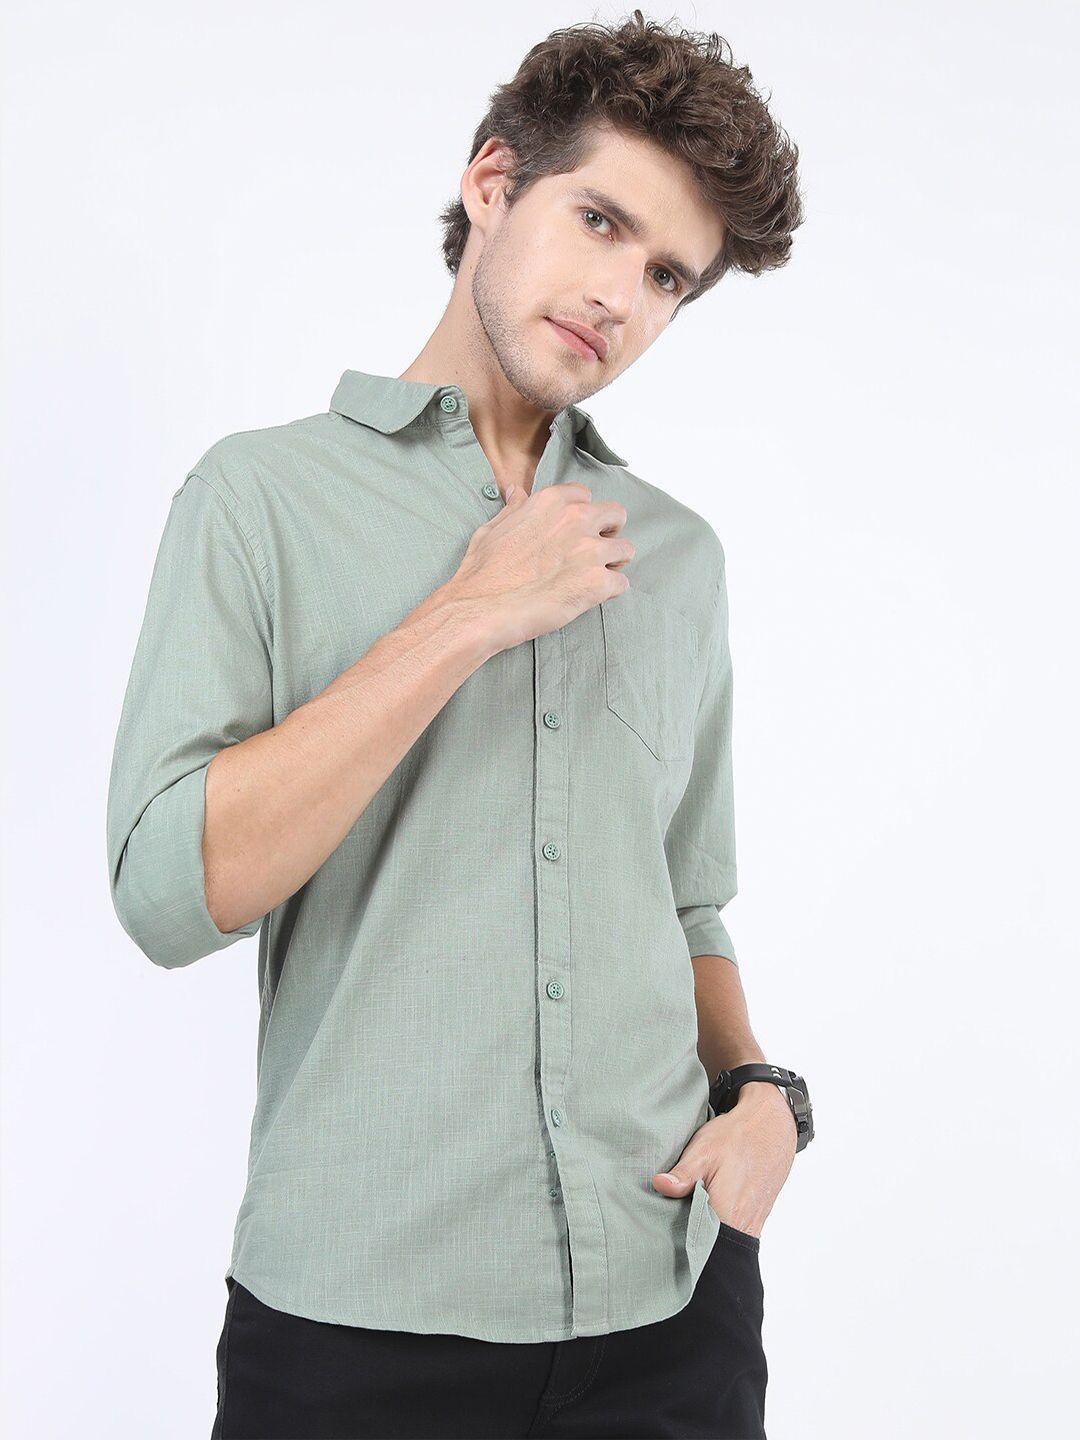 ketch-men-olive-green-solid-slim-fit-casual-shirt